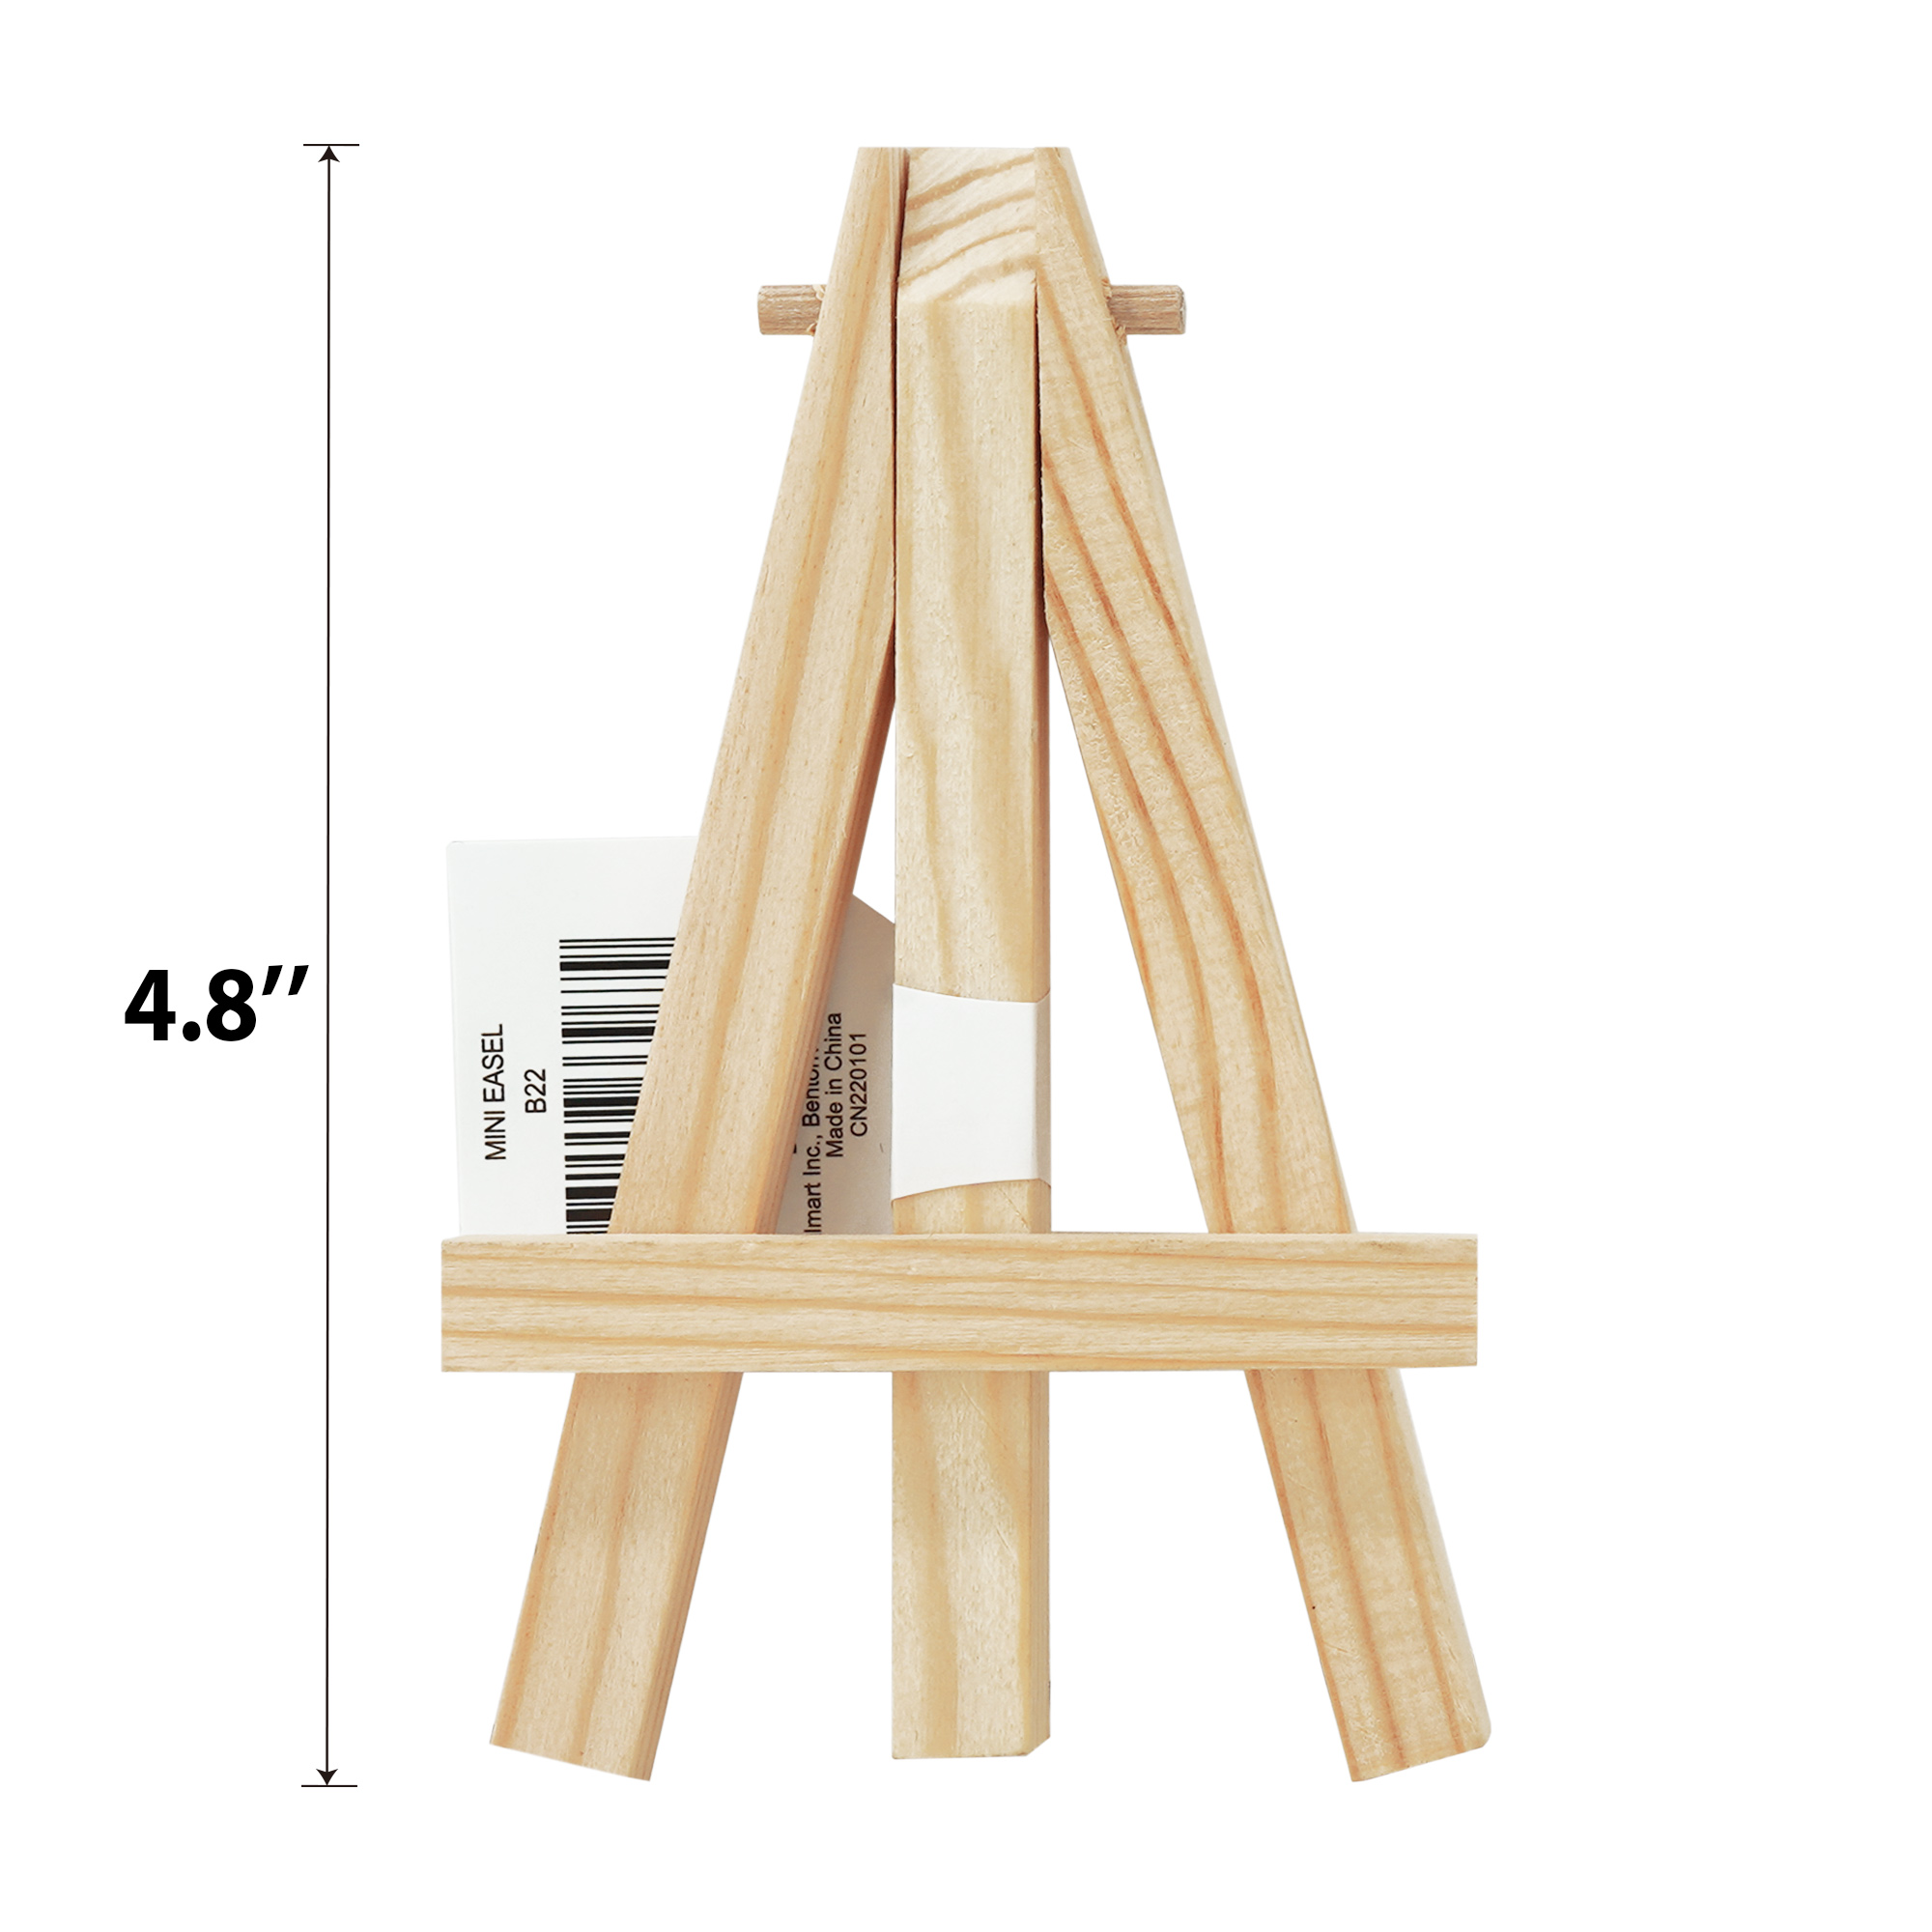 Mini Natural Wood Display Easel, Solid Pine Wood, 4.8", 1 Piece, Vendor Labelling, Great Chioce for Beginners and Hobbyists of all skill levels. - image 2 of 4